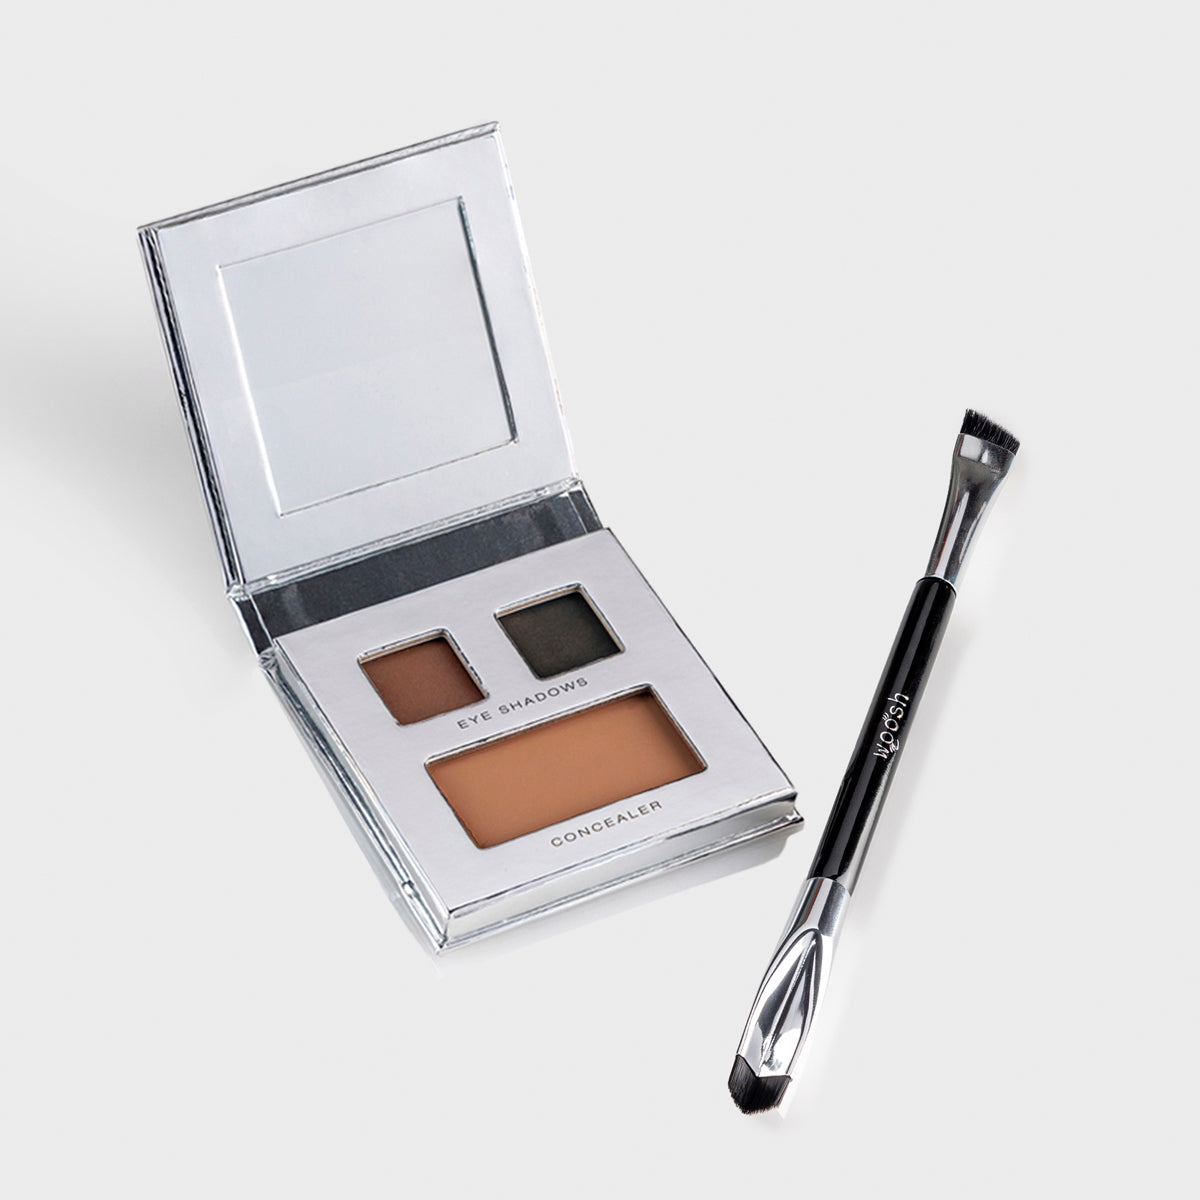 Smokey Eye Palette with two eyeshadows and one toffee concealer with the Corner Brush